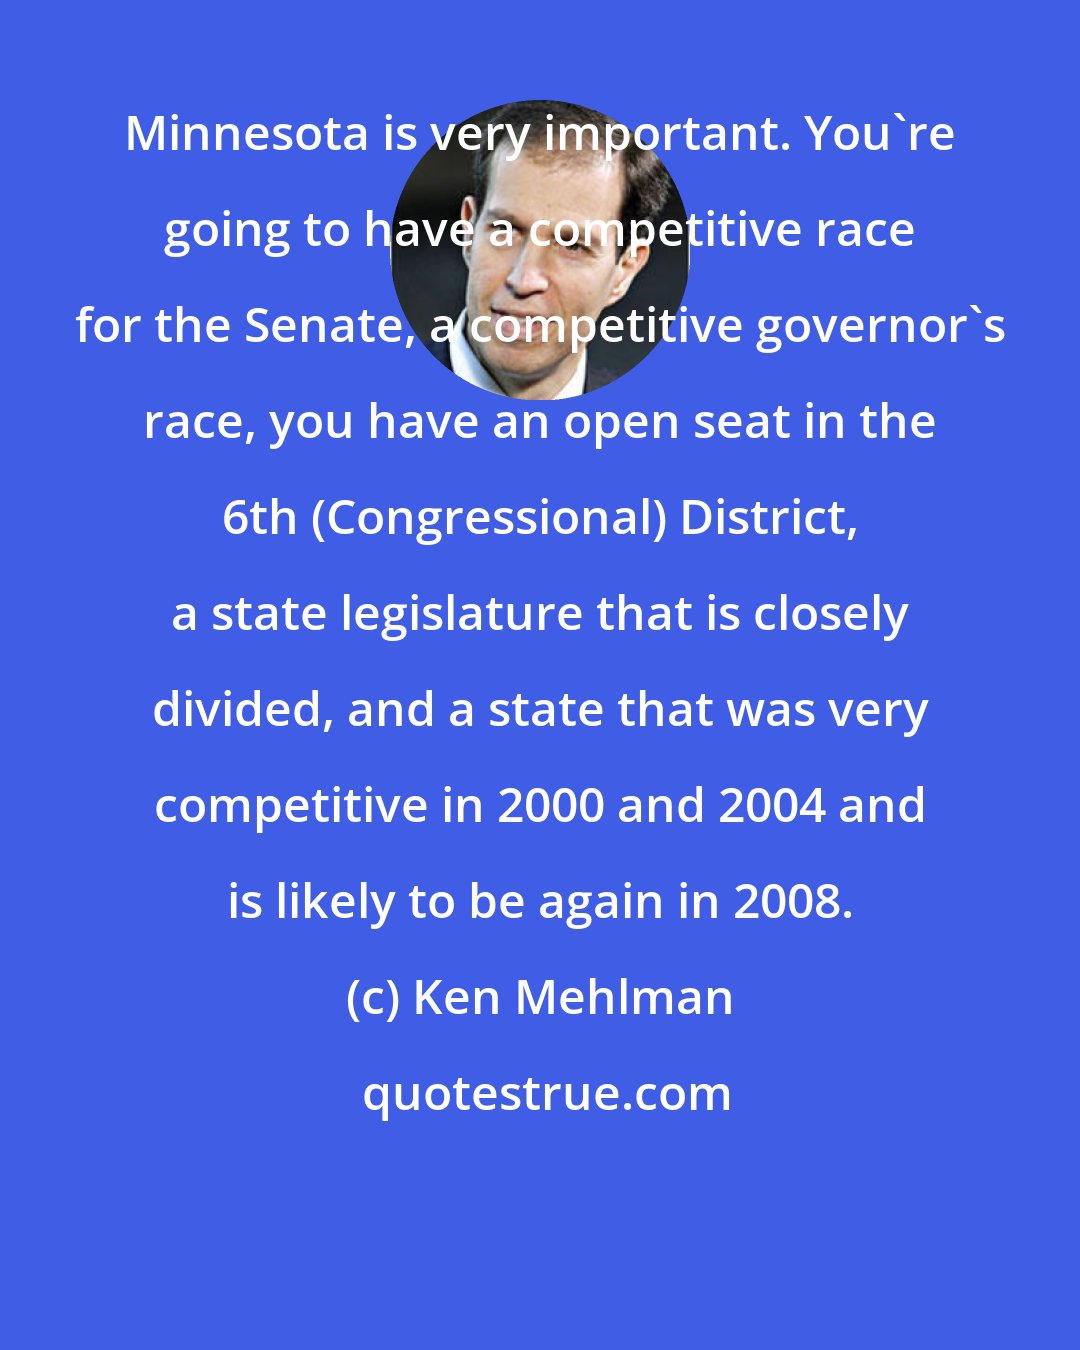 Ken Mehlman: Minnesota is very important. You're going to have a competitive race for the Senate, a competitive governor's race, you have an open seat in the 6th (Congressional) District, a state legislature that is closely divided, and a state that was very competitive in 2000 and 2004 and is likely to be again in 2008.